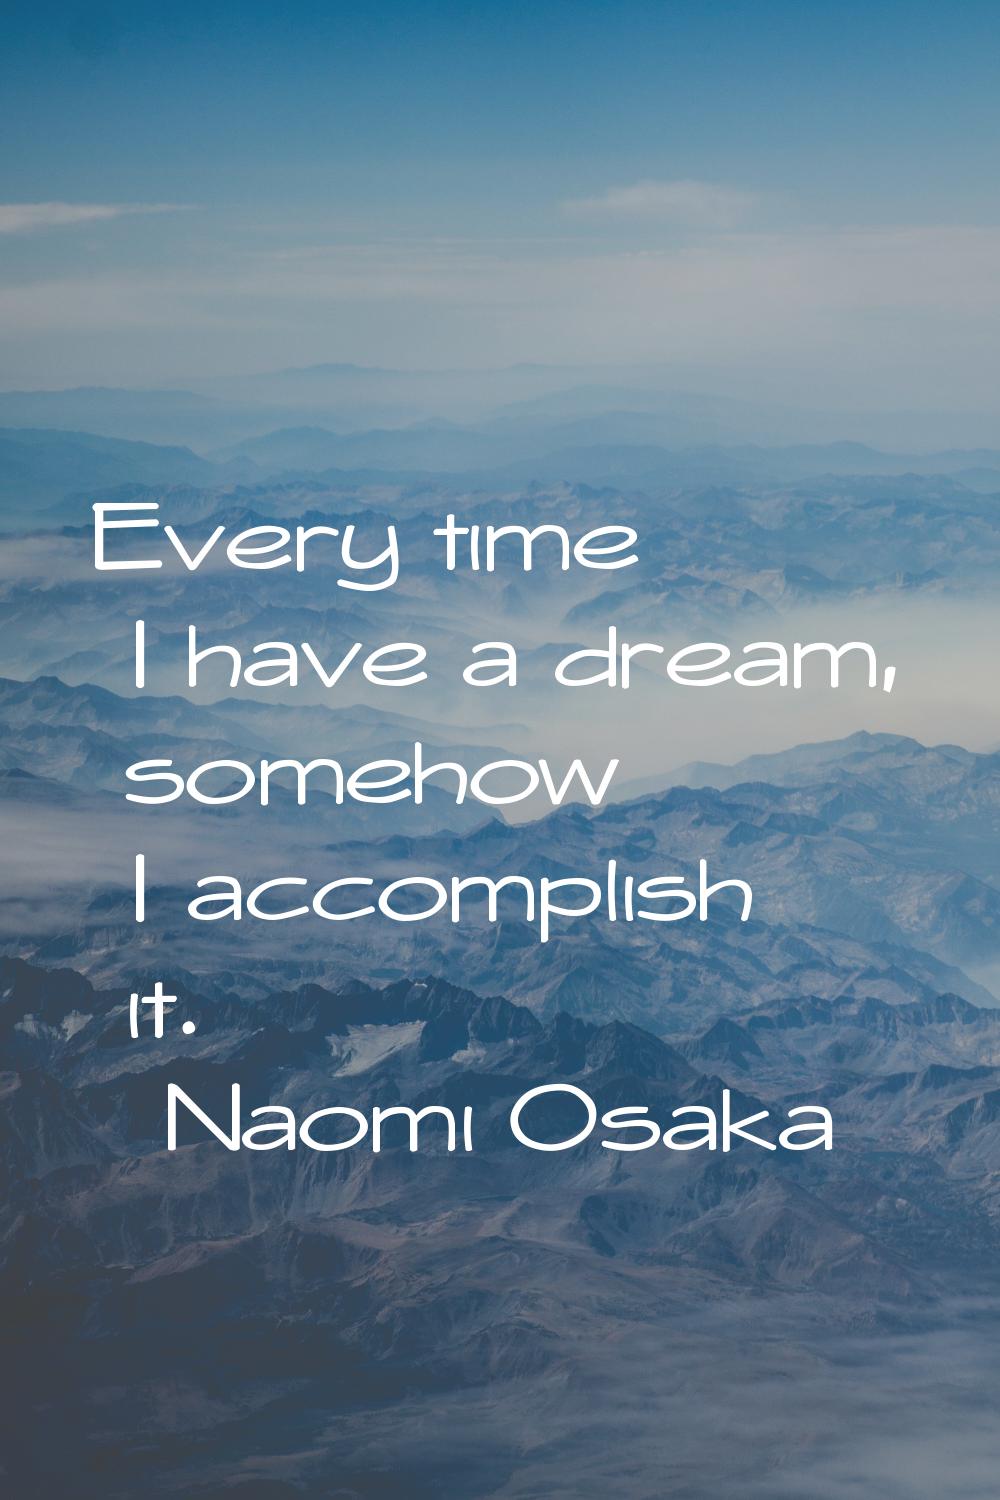 Every time I have a dream, somehow I accomplish it.